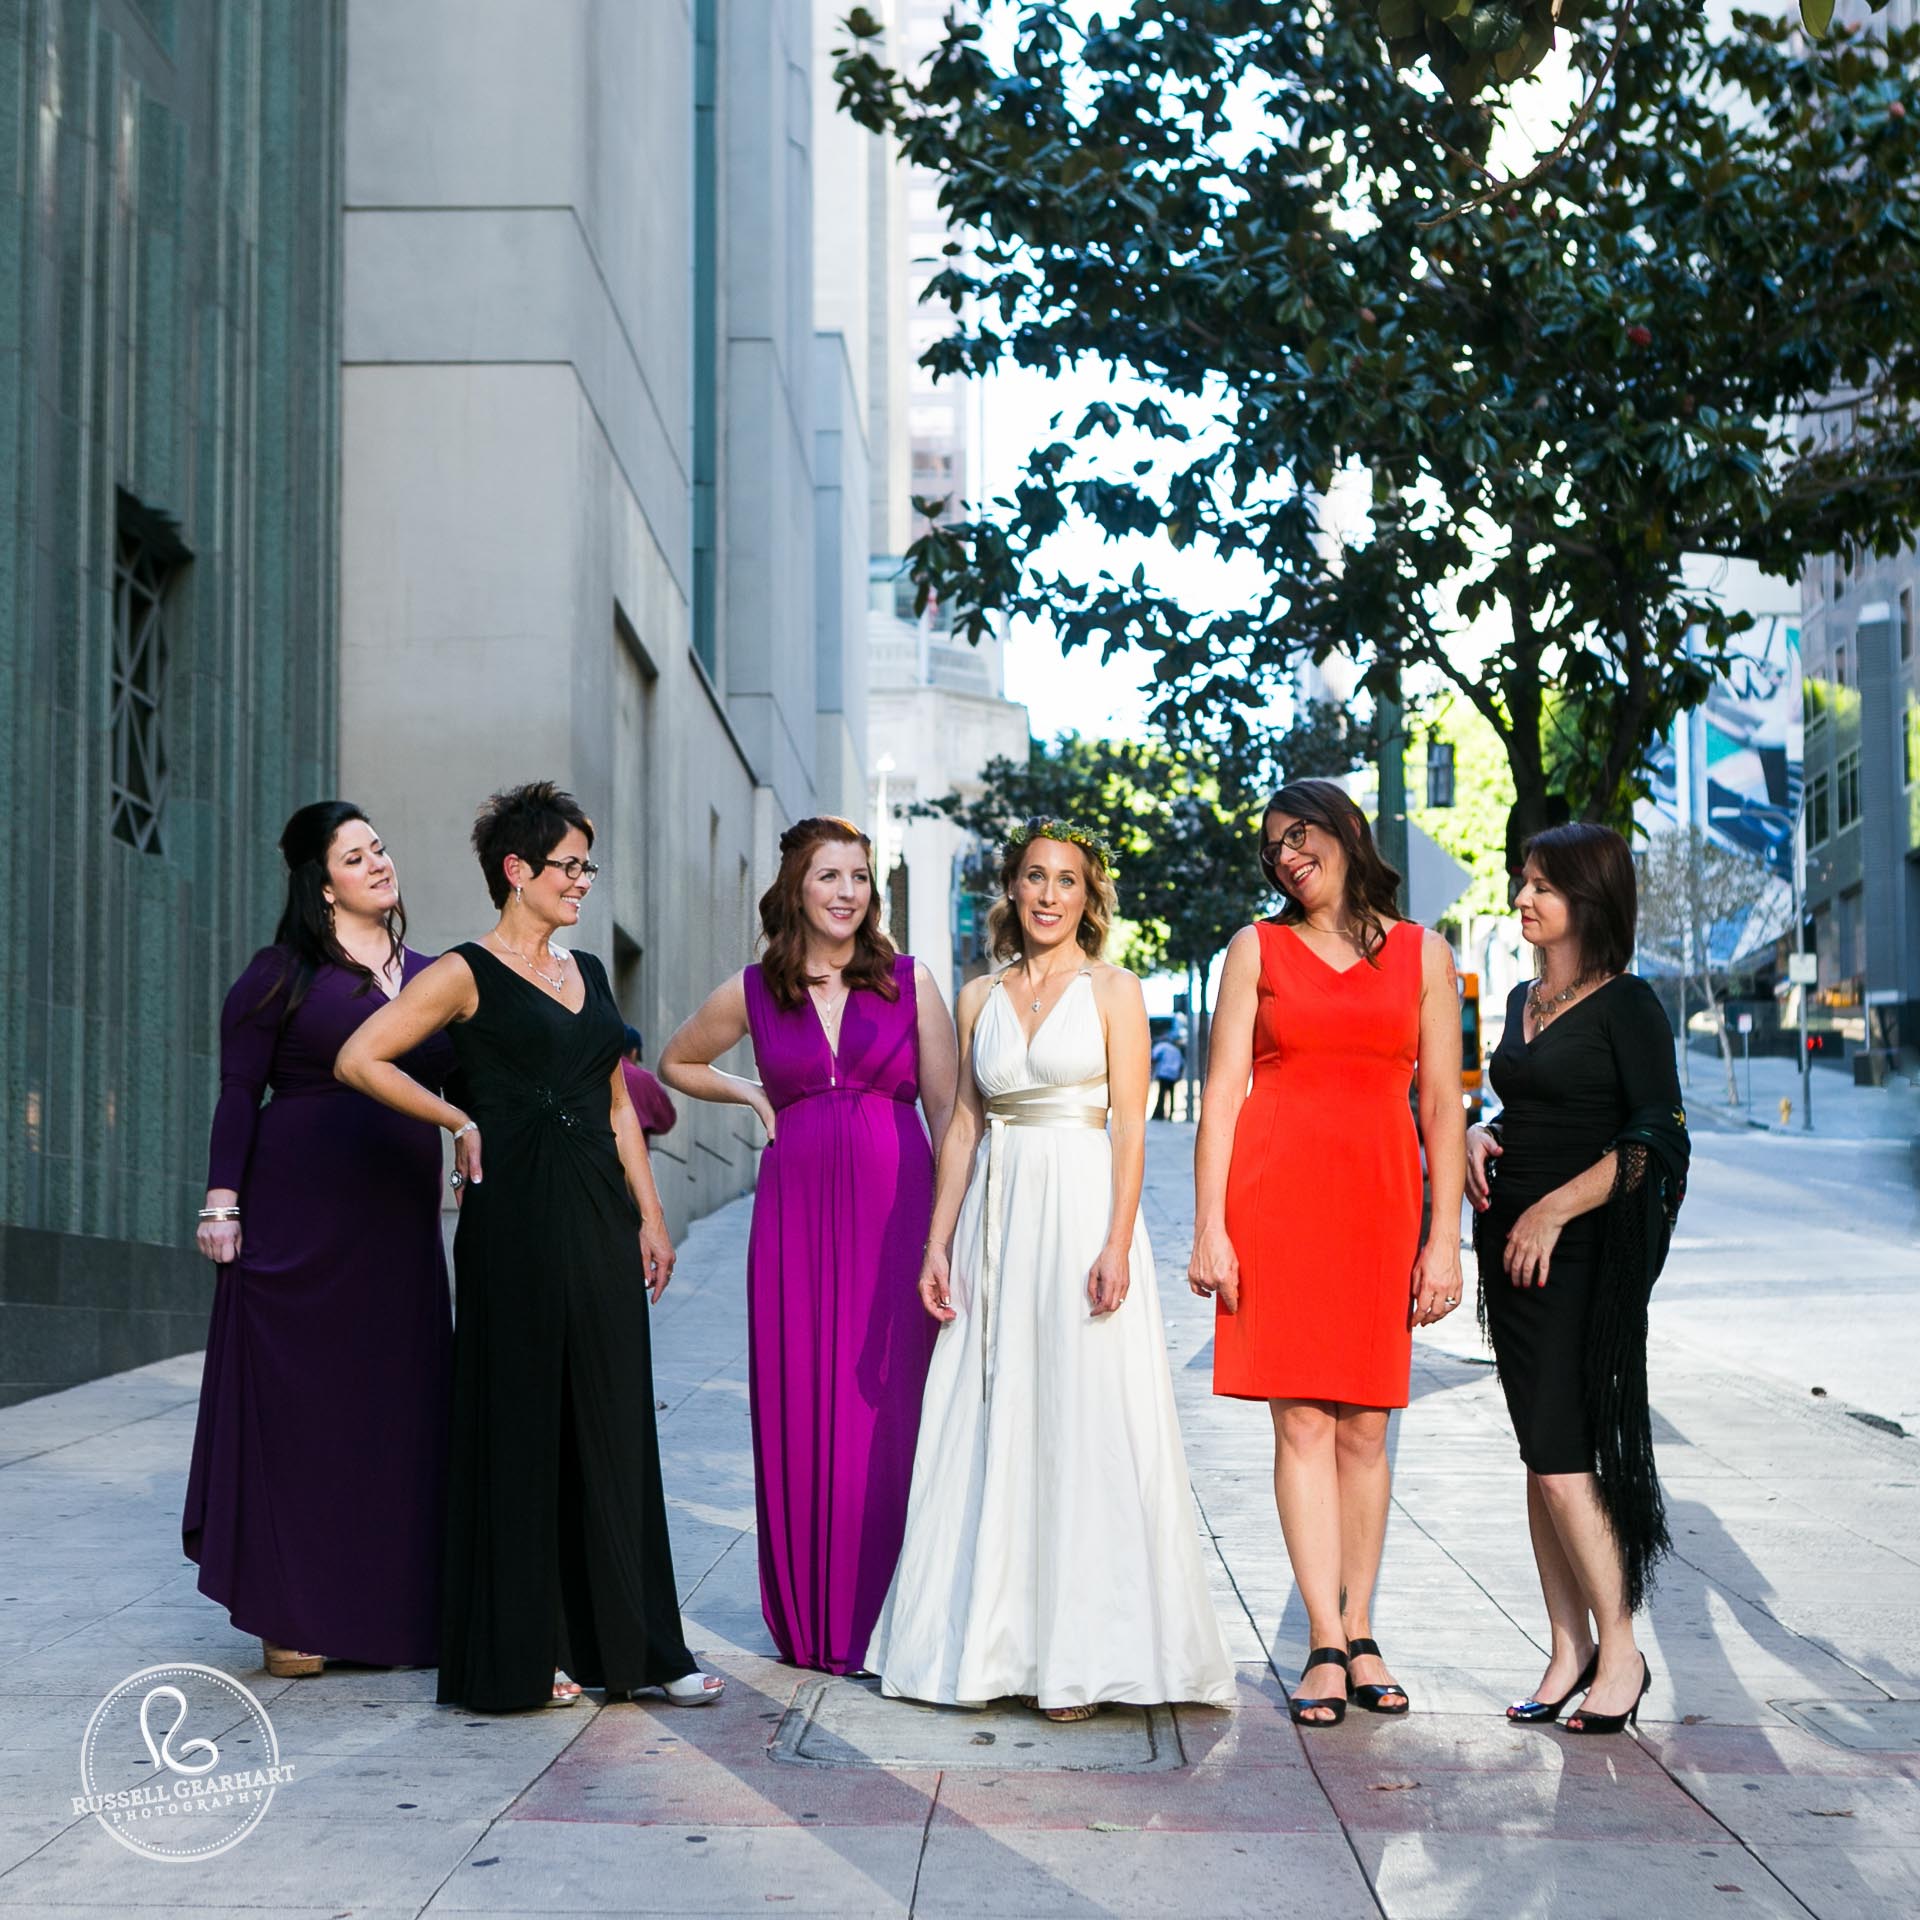 Bride and bridesmaids in streets of Downtown Los Angeles – Southern California Wedding at the Millwick – www.gearhartphoto.com – Russell Gearhart Photography